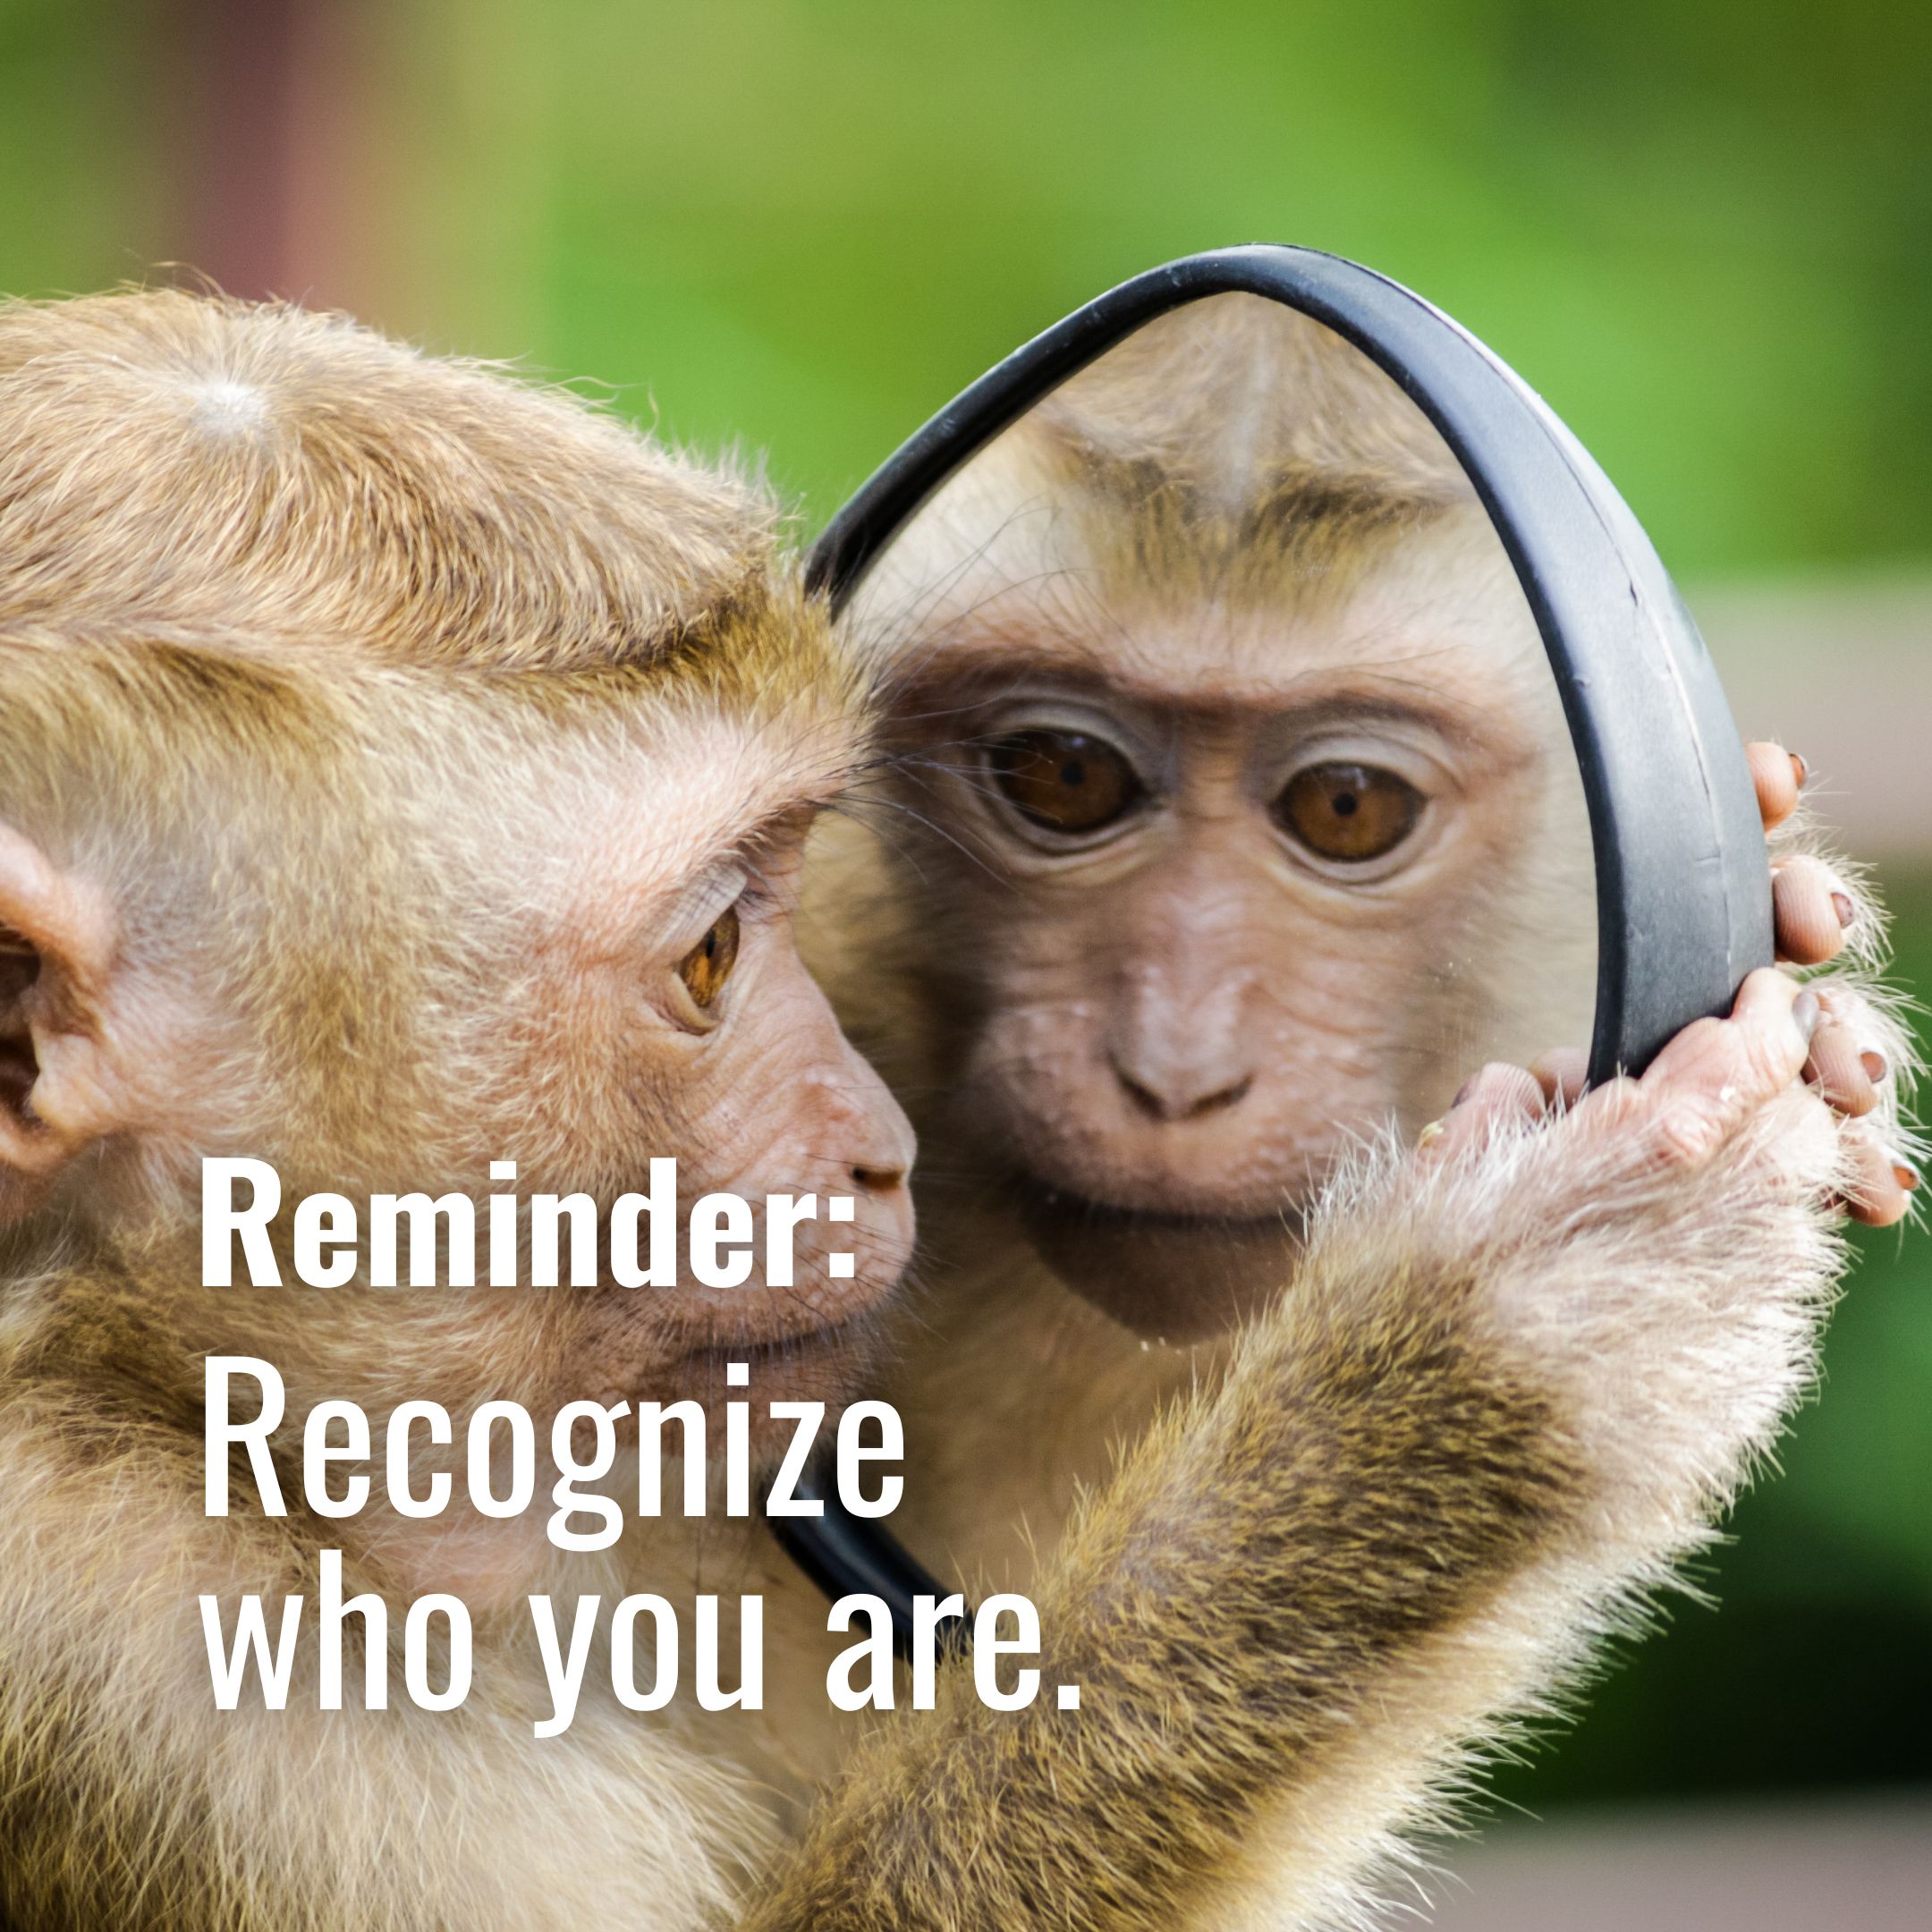 Recognize who you are